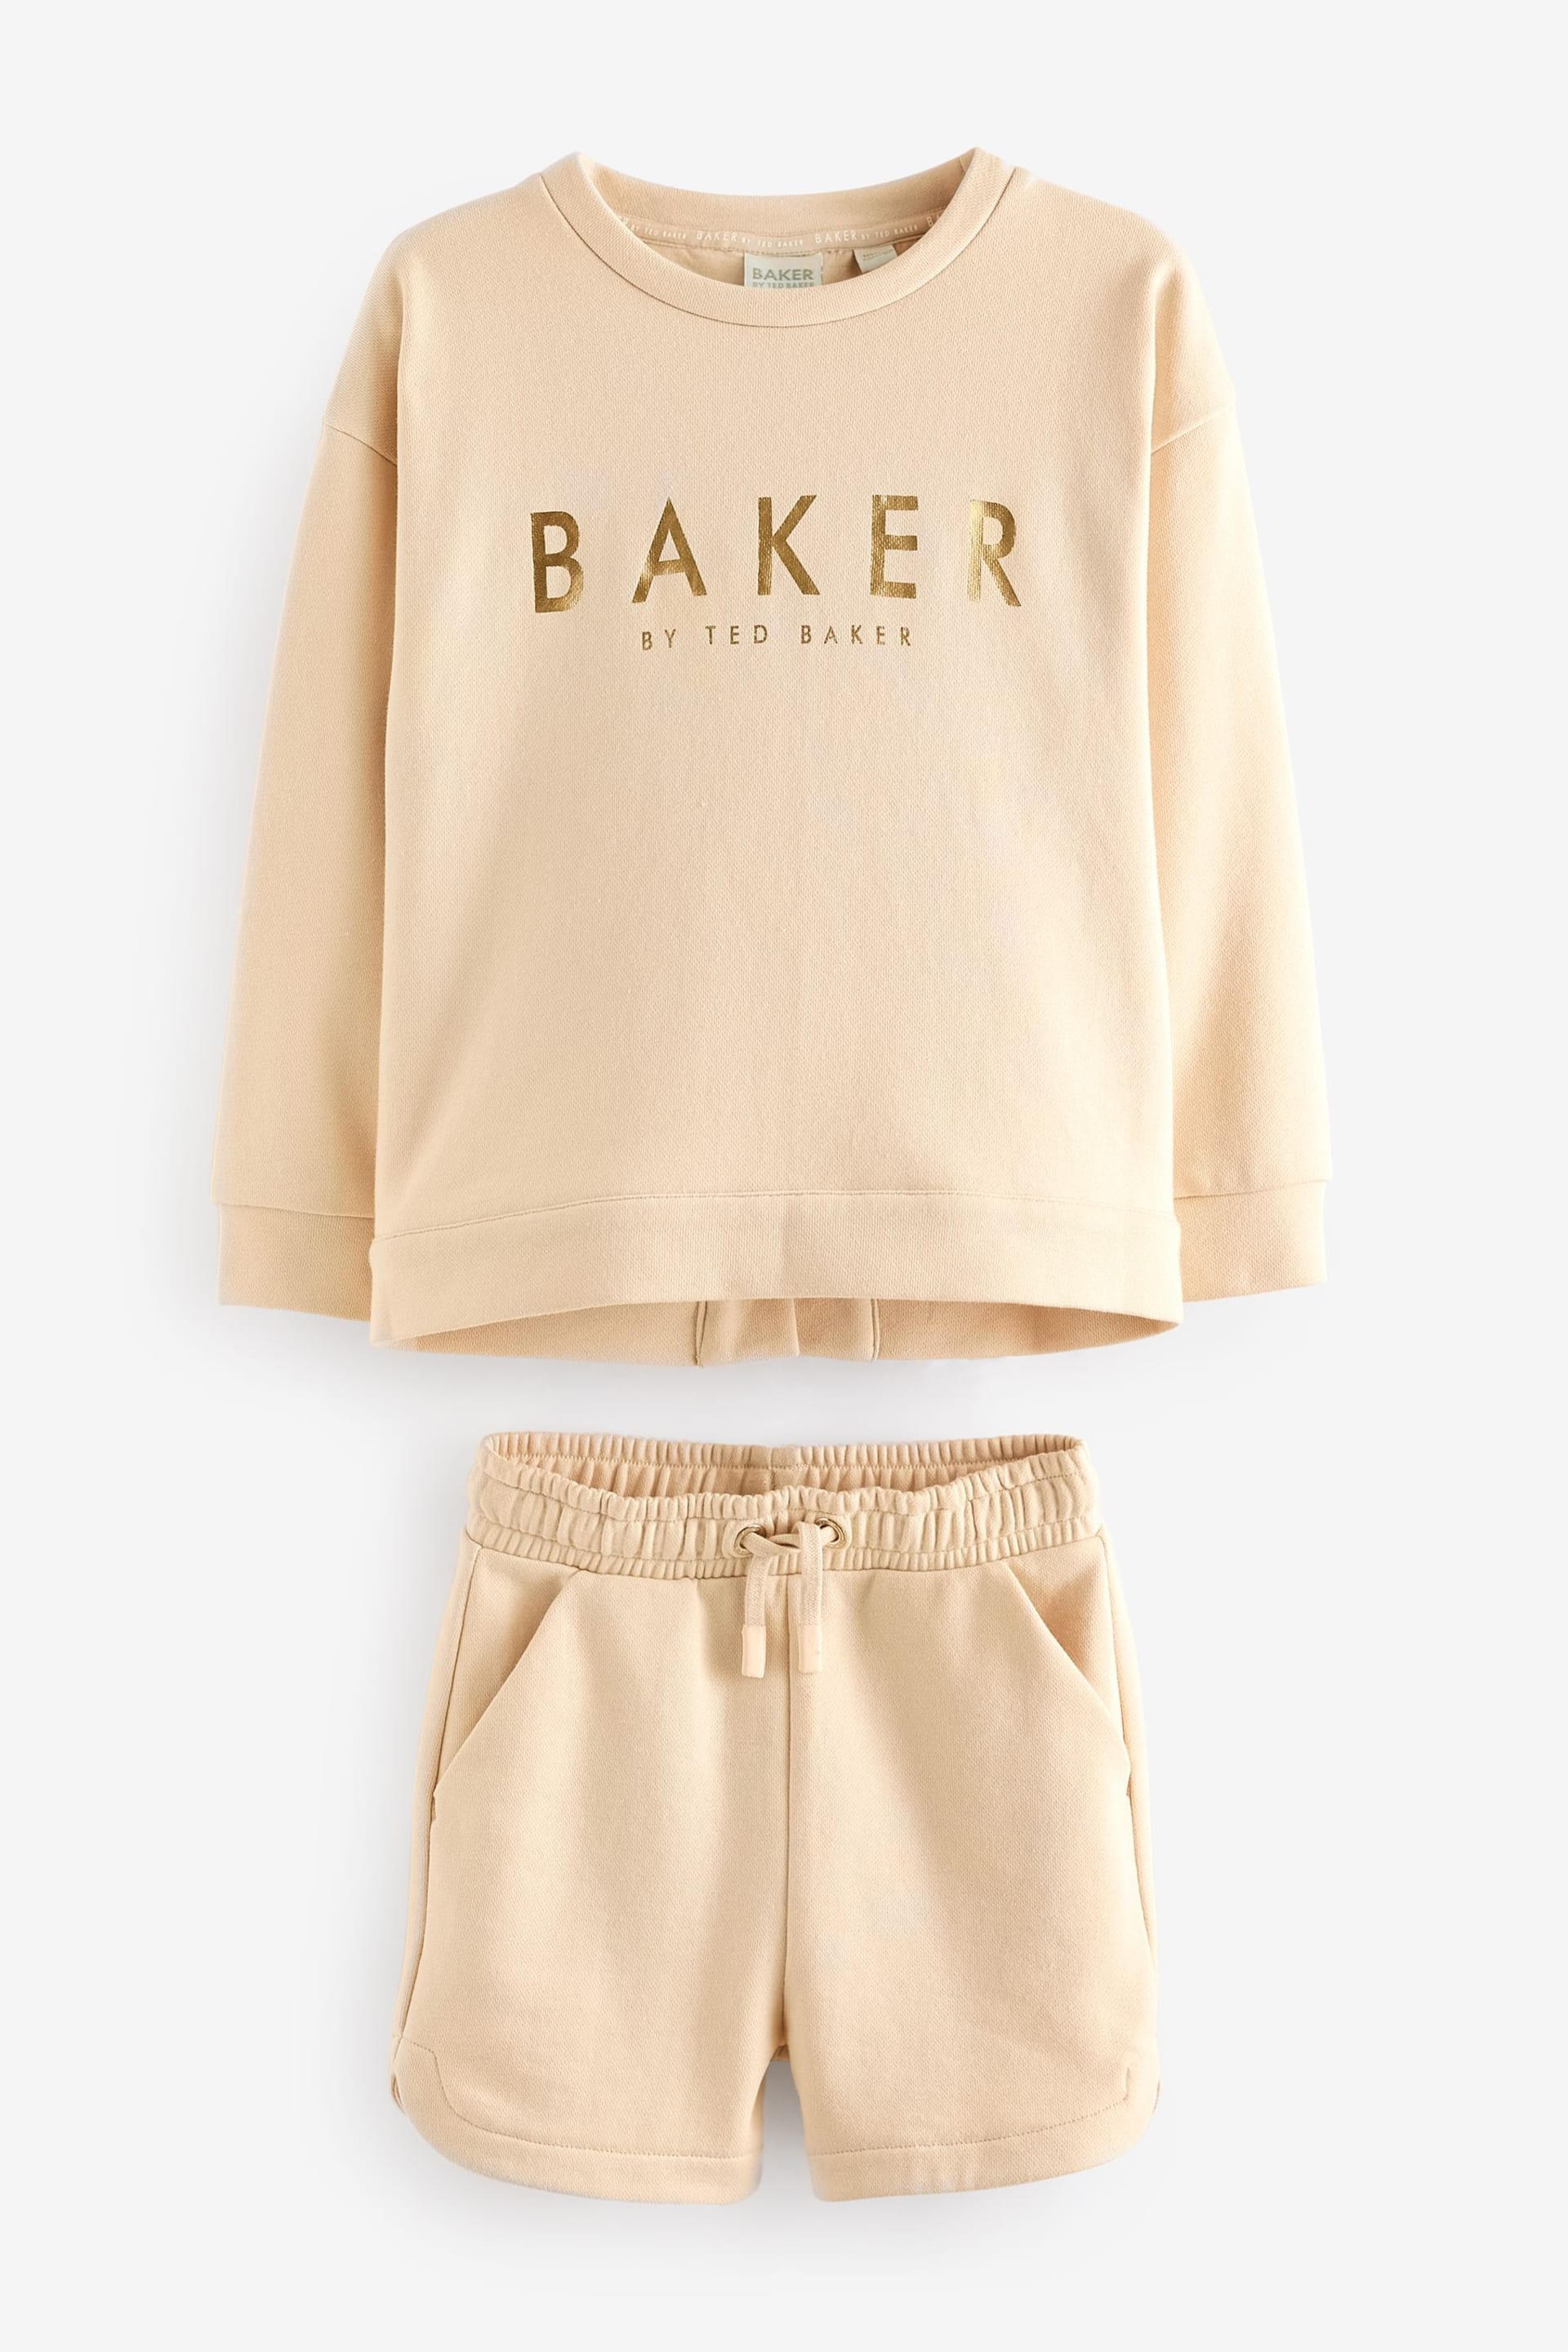 Baker by Ted Baker Stone Split Back Sweater And Shorts Set - Image 8 of 10